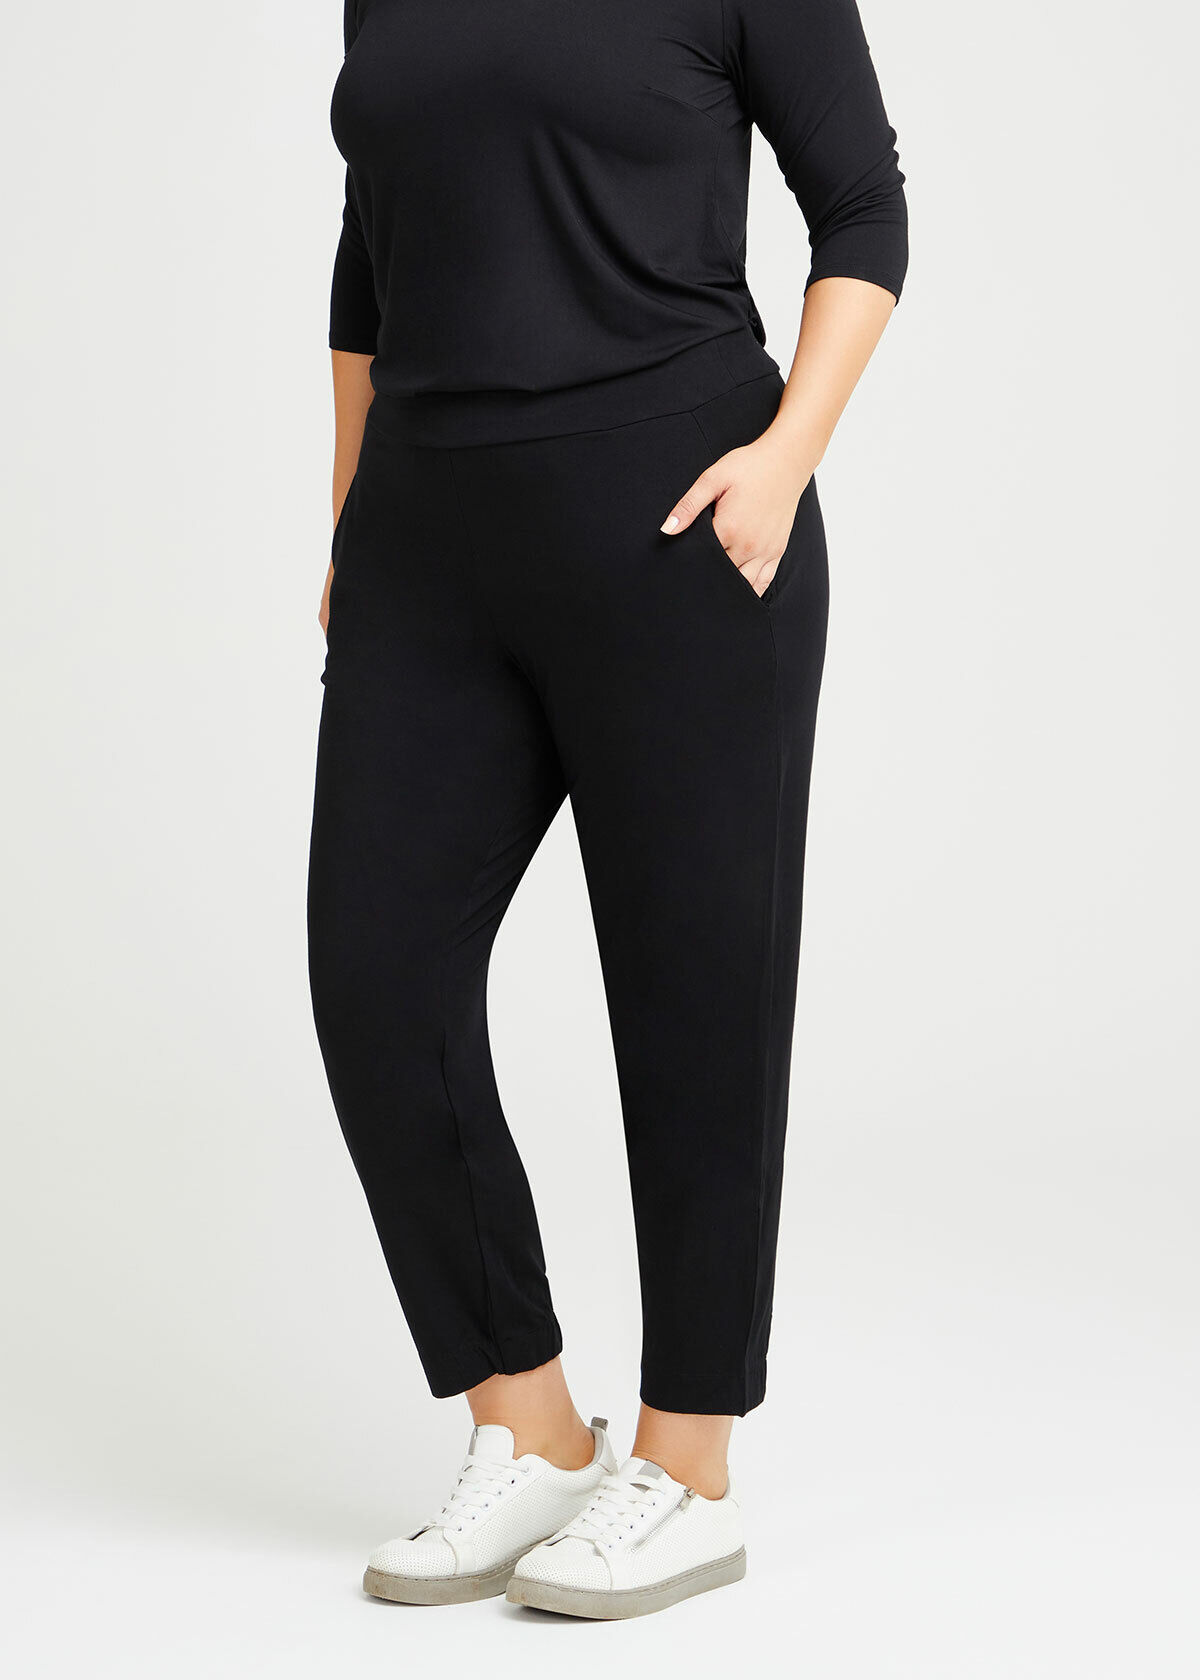 13 best black pants for women in 2022 for under $100 - TODAY